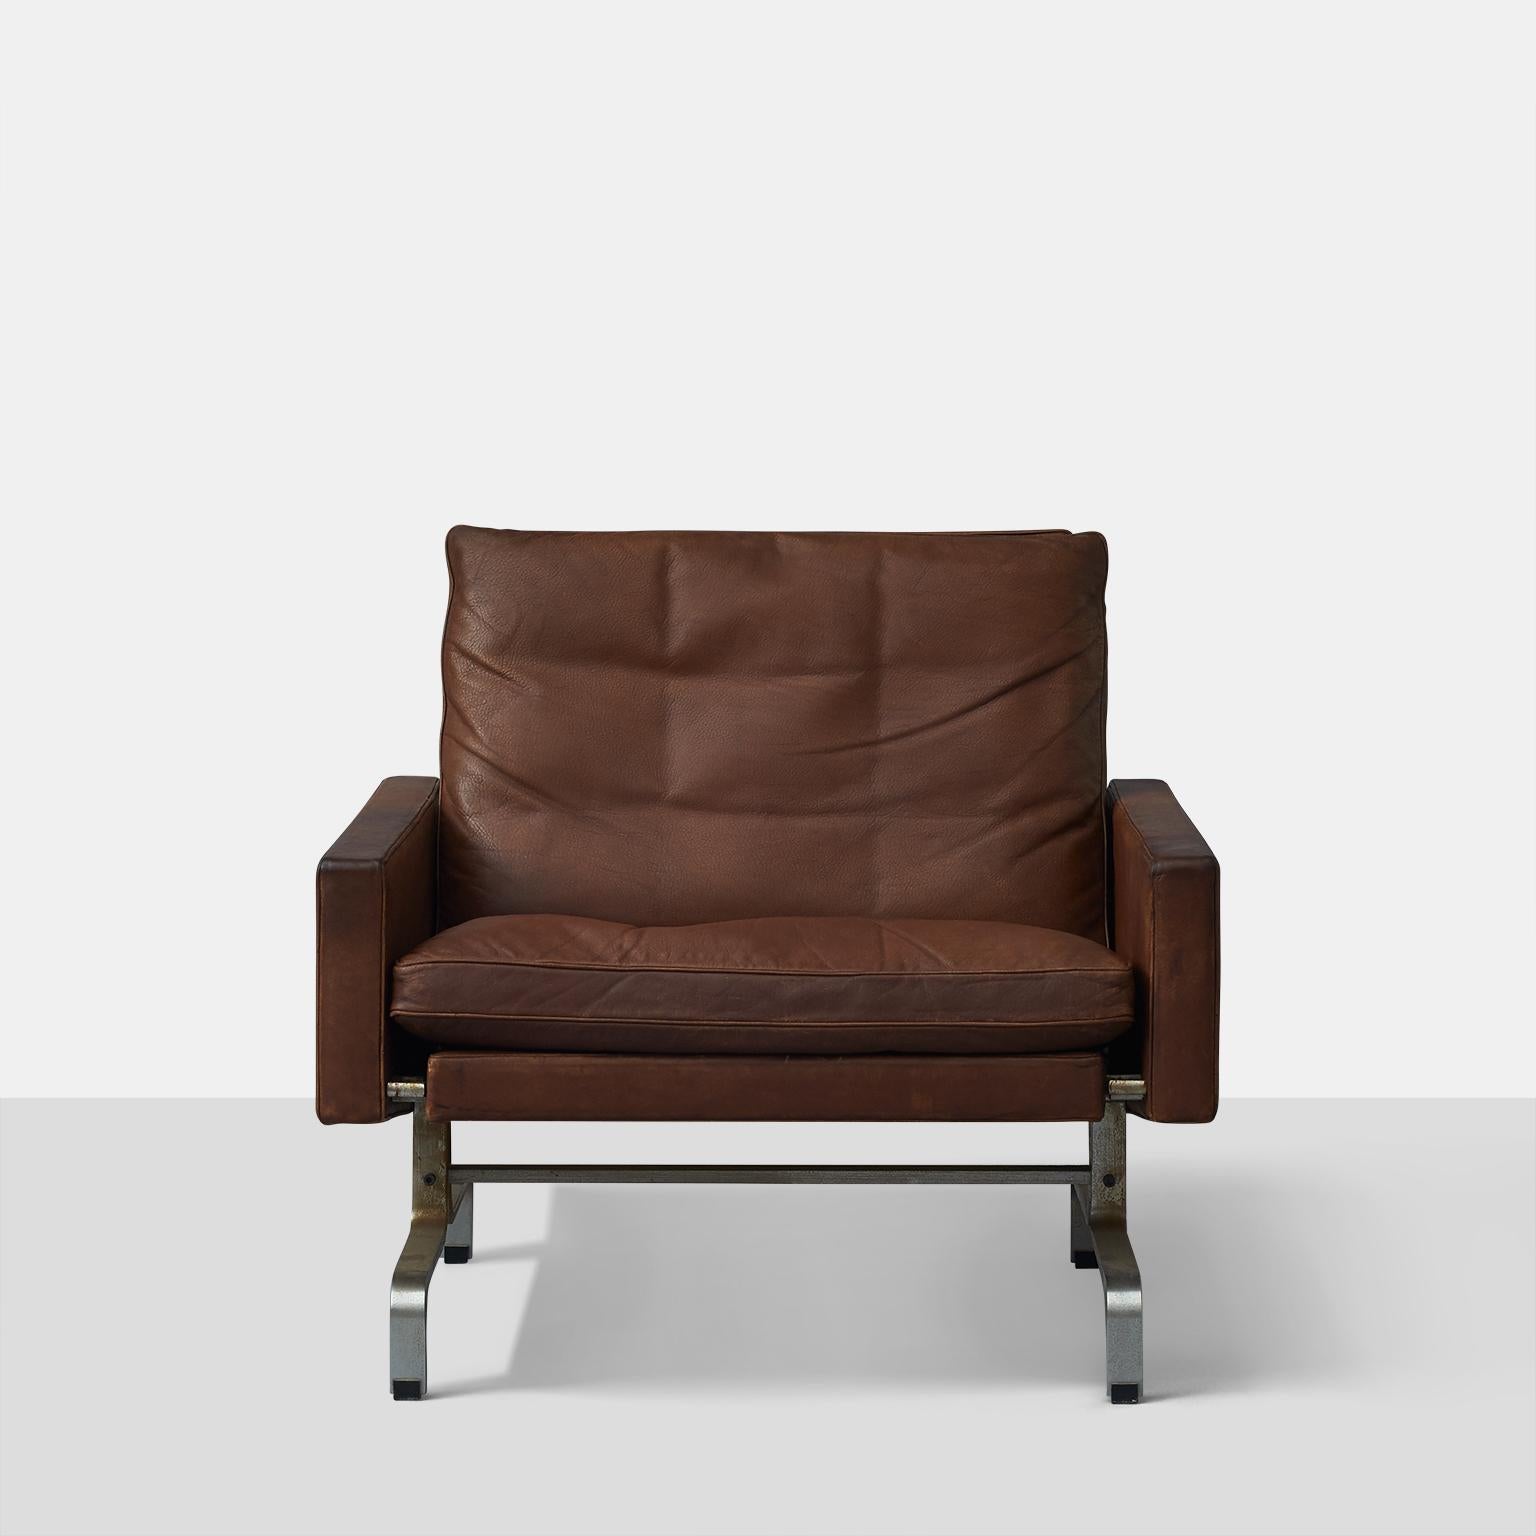 A PK 31/1 lounge chair by Poul Kjaerholm, produced by E. Kold Christensen. Features a matte- chromed steel base and original leather upholstery. Stamped signature. Leather and foam are soft and pliable. Some oxidation to frames, all original